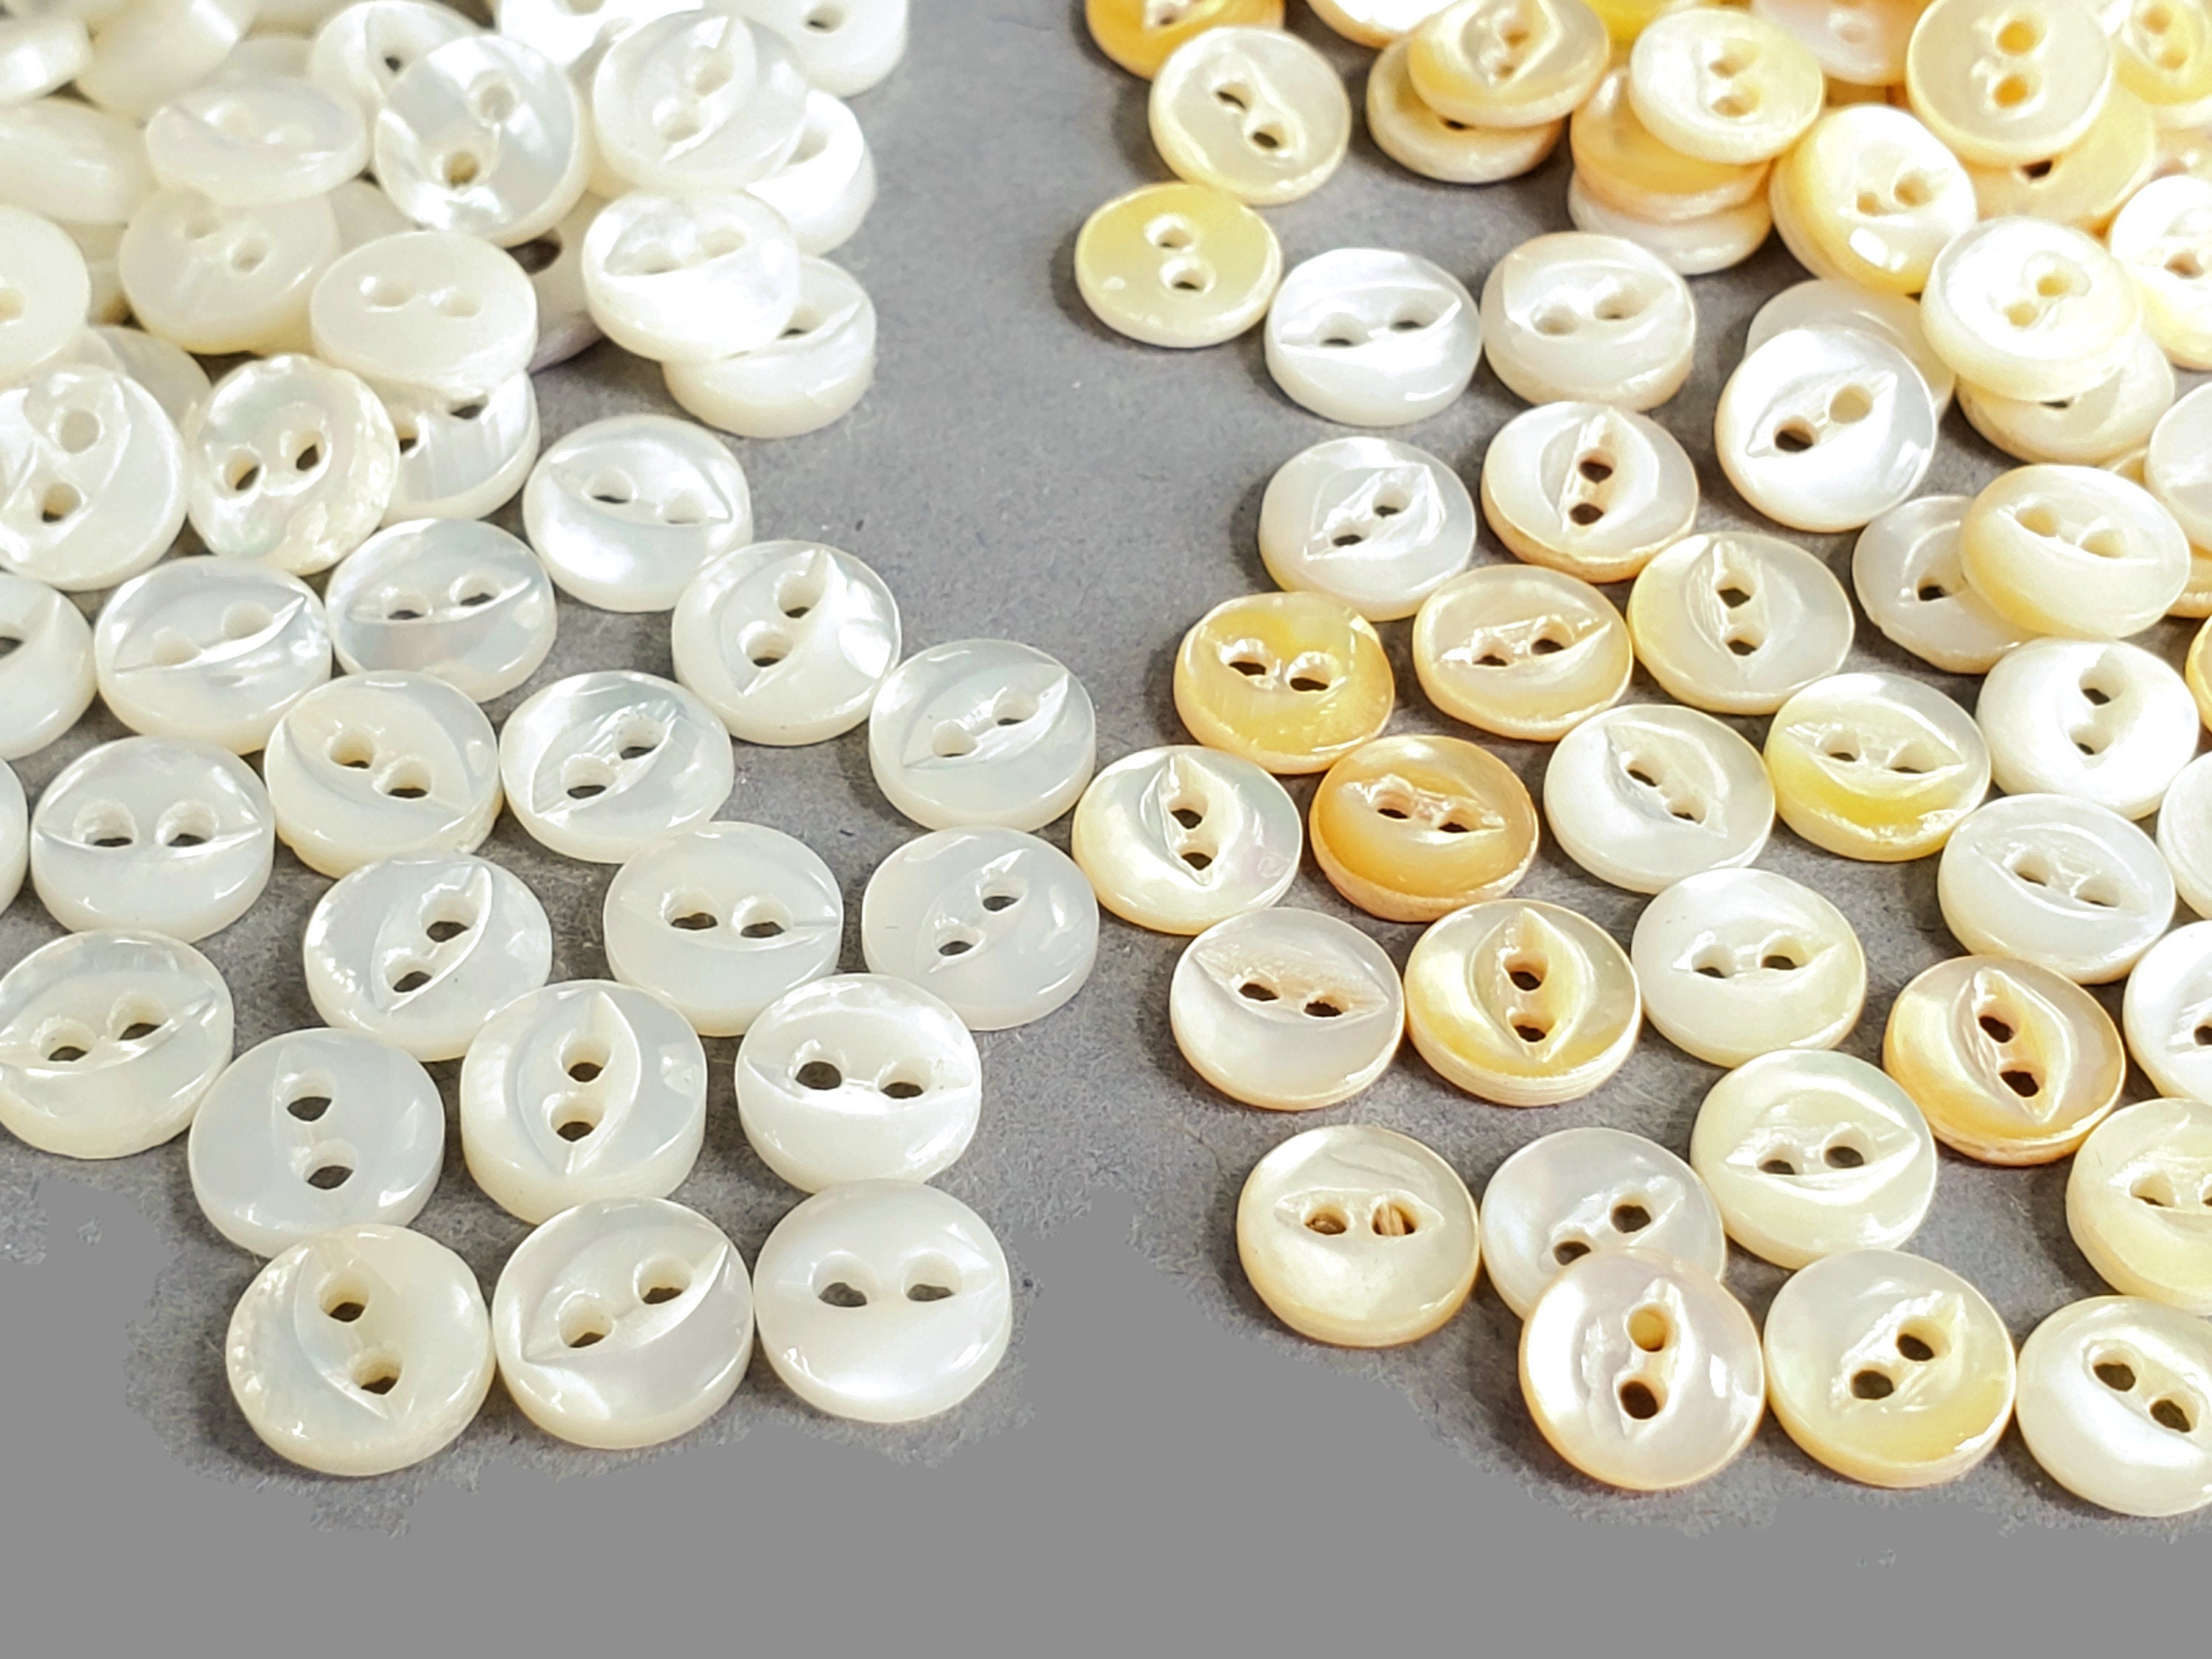  Hegebeck 12pcs Pearl Buttons for Clothes, Gold and